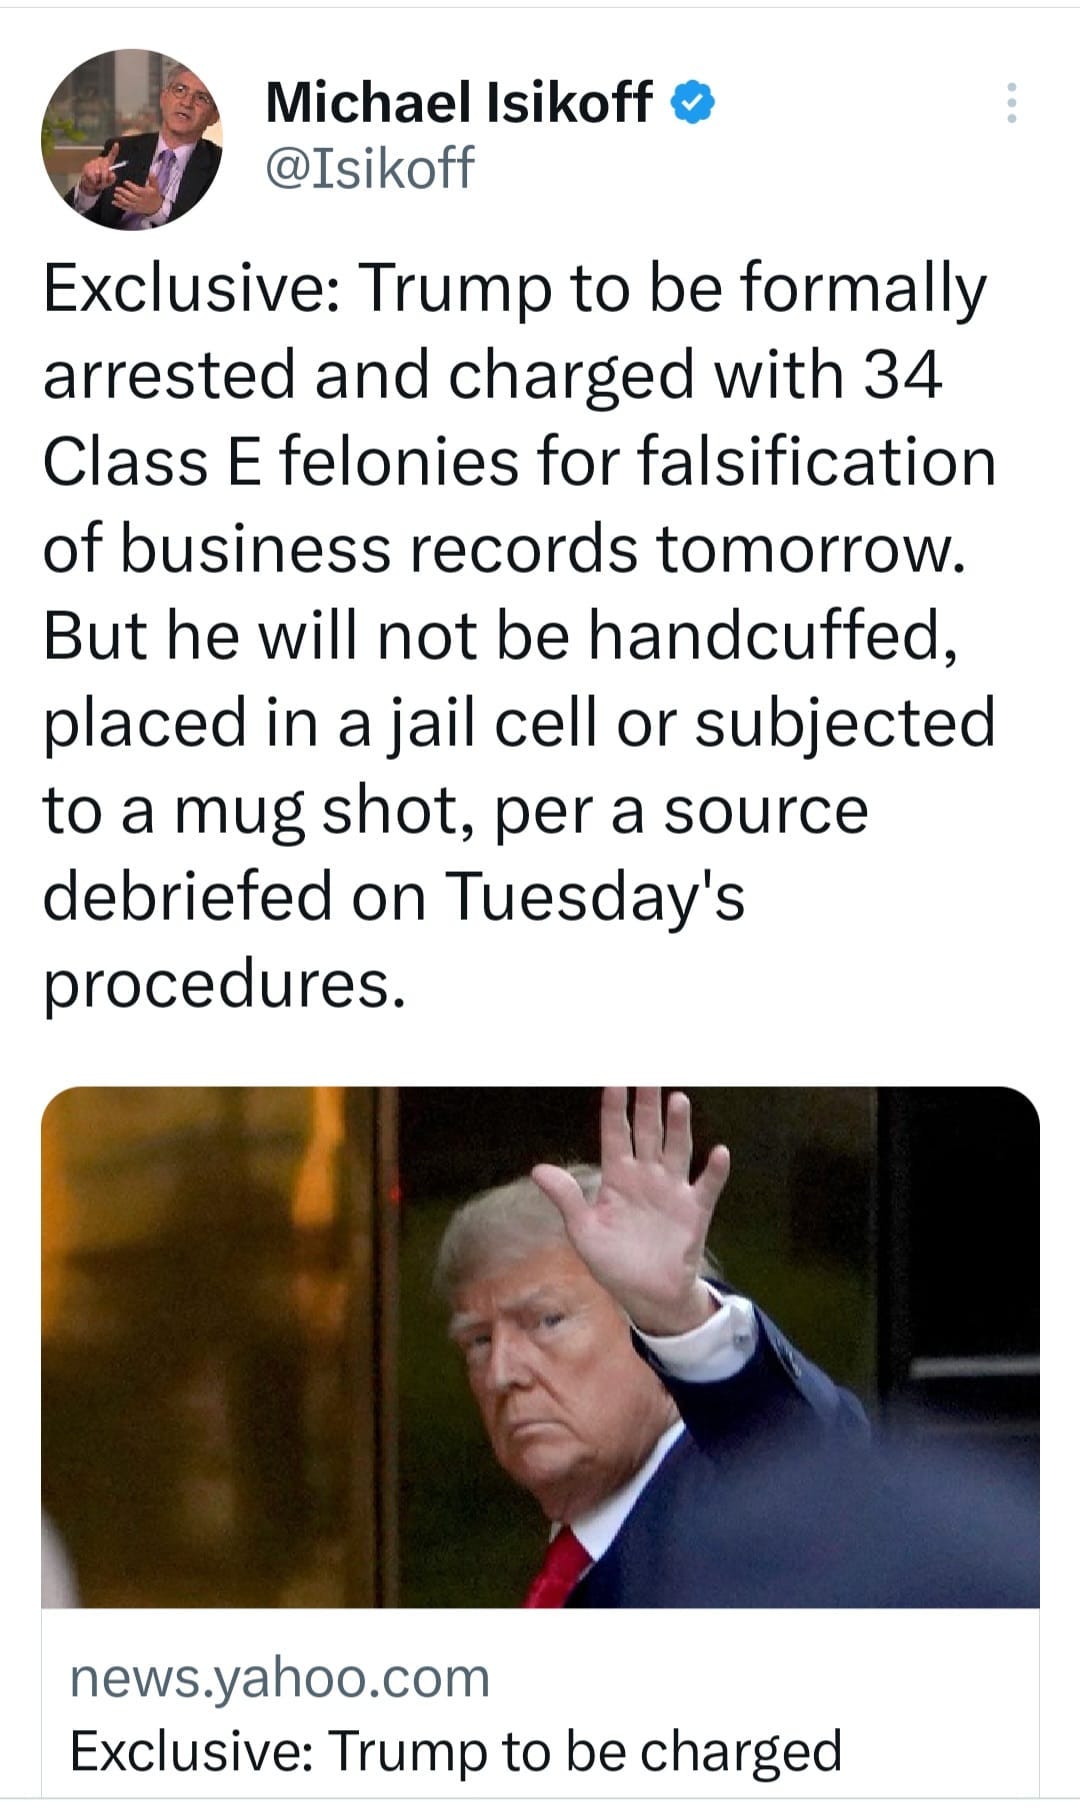 May be an image of 2 people and text that says 'Michael Isikoff @Isikoff Exclusive: Trump to be formally arrested and charged with 34 Class E felonies for falsification of business records tomorrow. But he will not be handcuffed, placed in a jail cell or subjected to a mug shot, per a source debriefed on Tuesday's procedures. news.yahoo.com Exclusive: Trump to be charged'